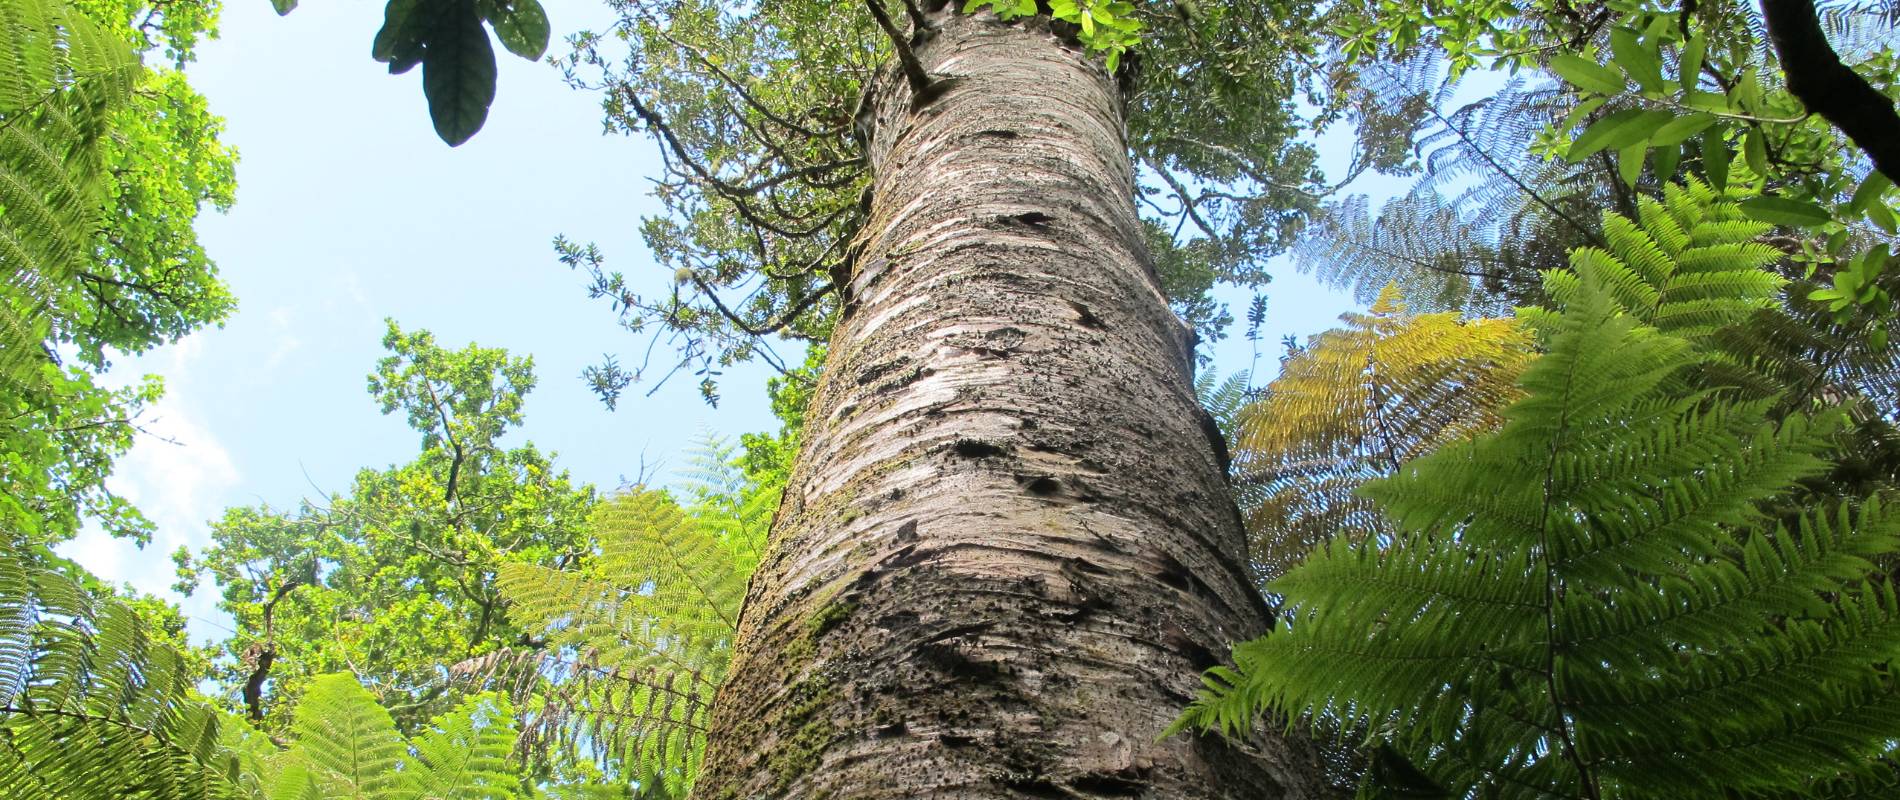 Big Kauri Tree in St Johns Bush in Auckland